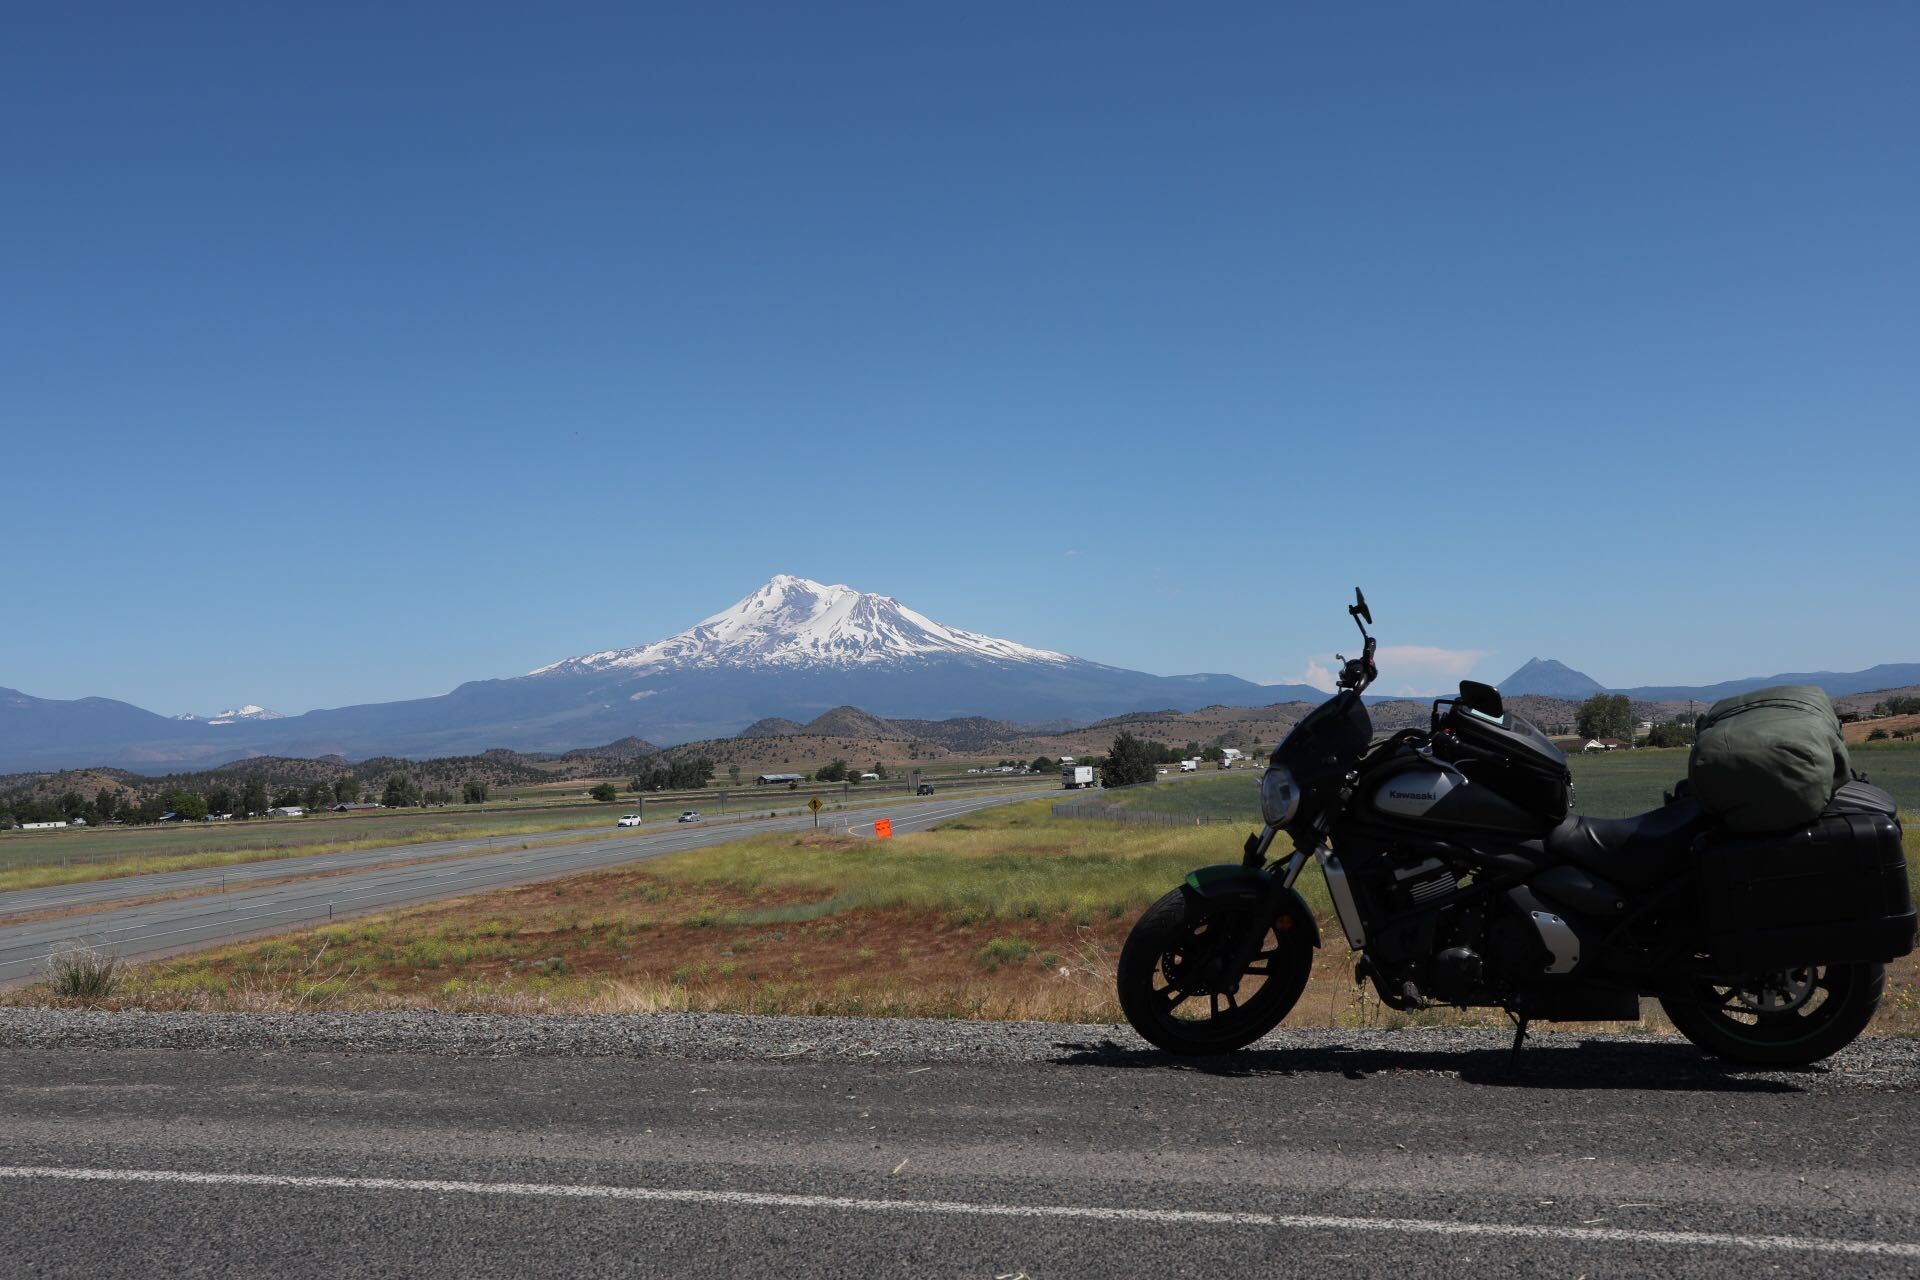 And this is Shasta from an overpass after I had coasted down two hills and rode on fumes to get fuel. From here it was mostly smooth riding to Bend. 